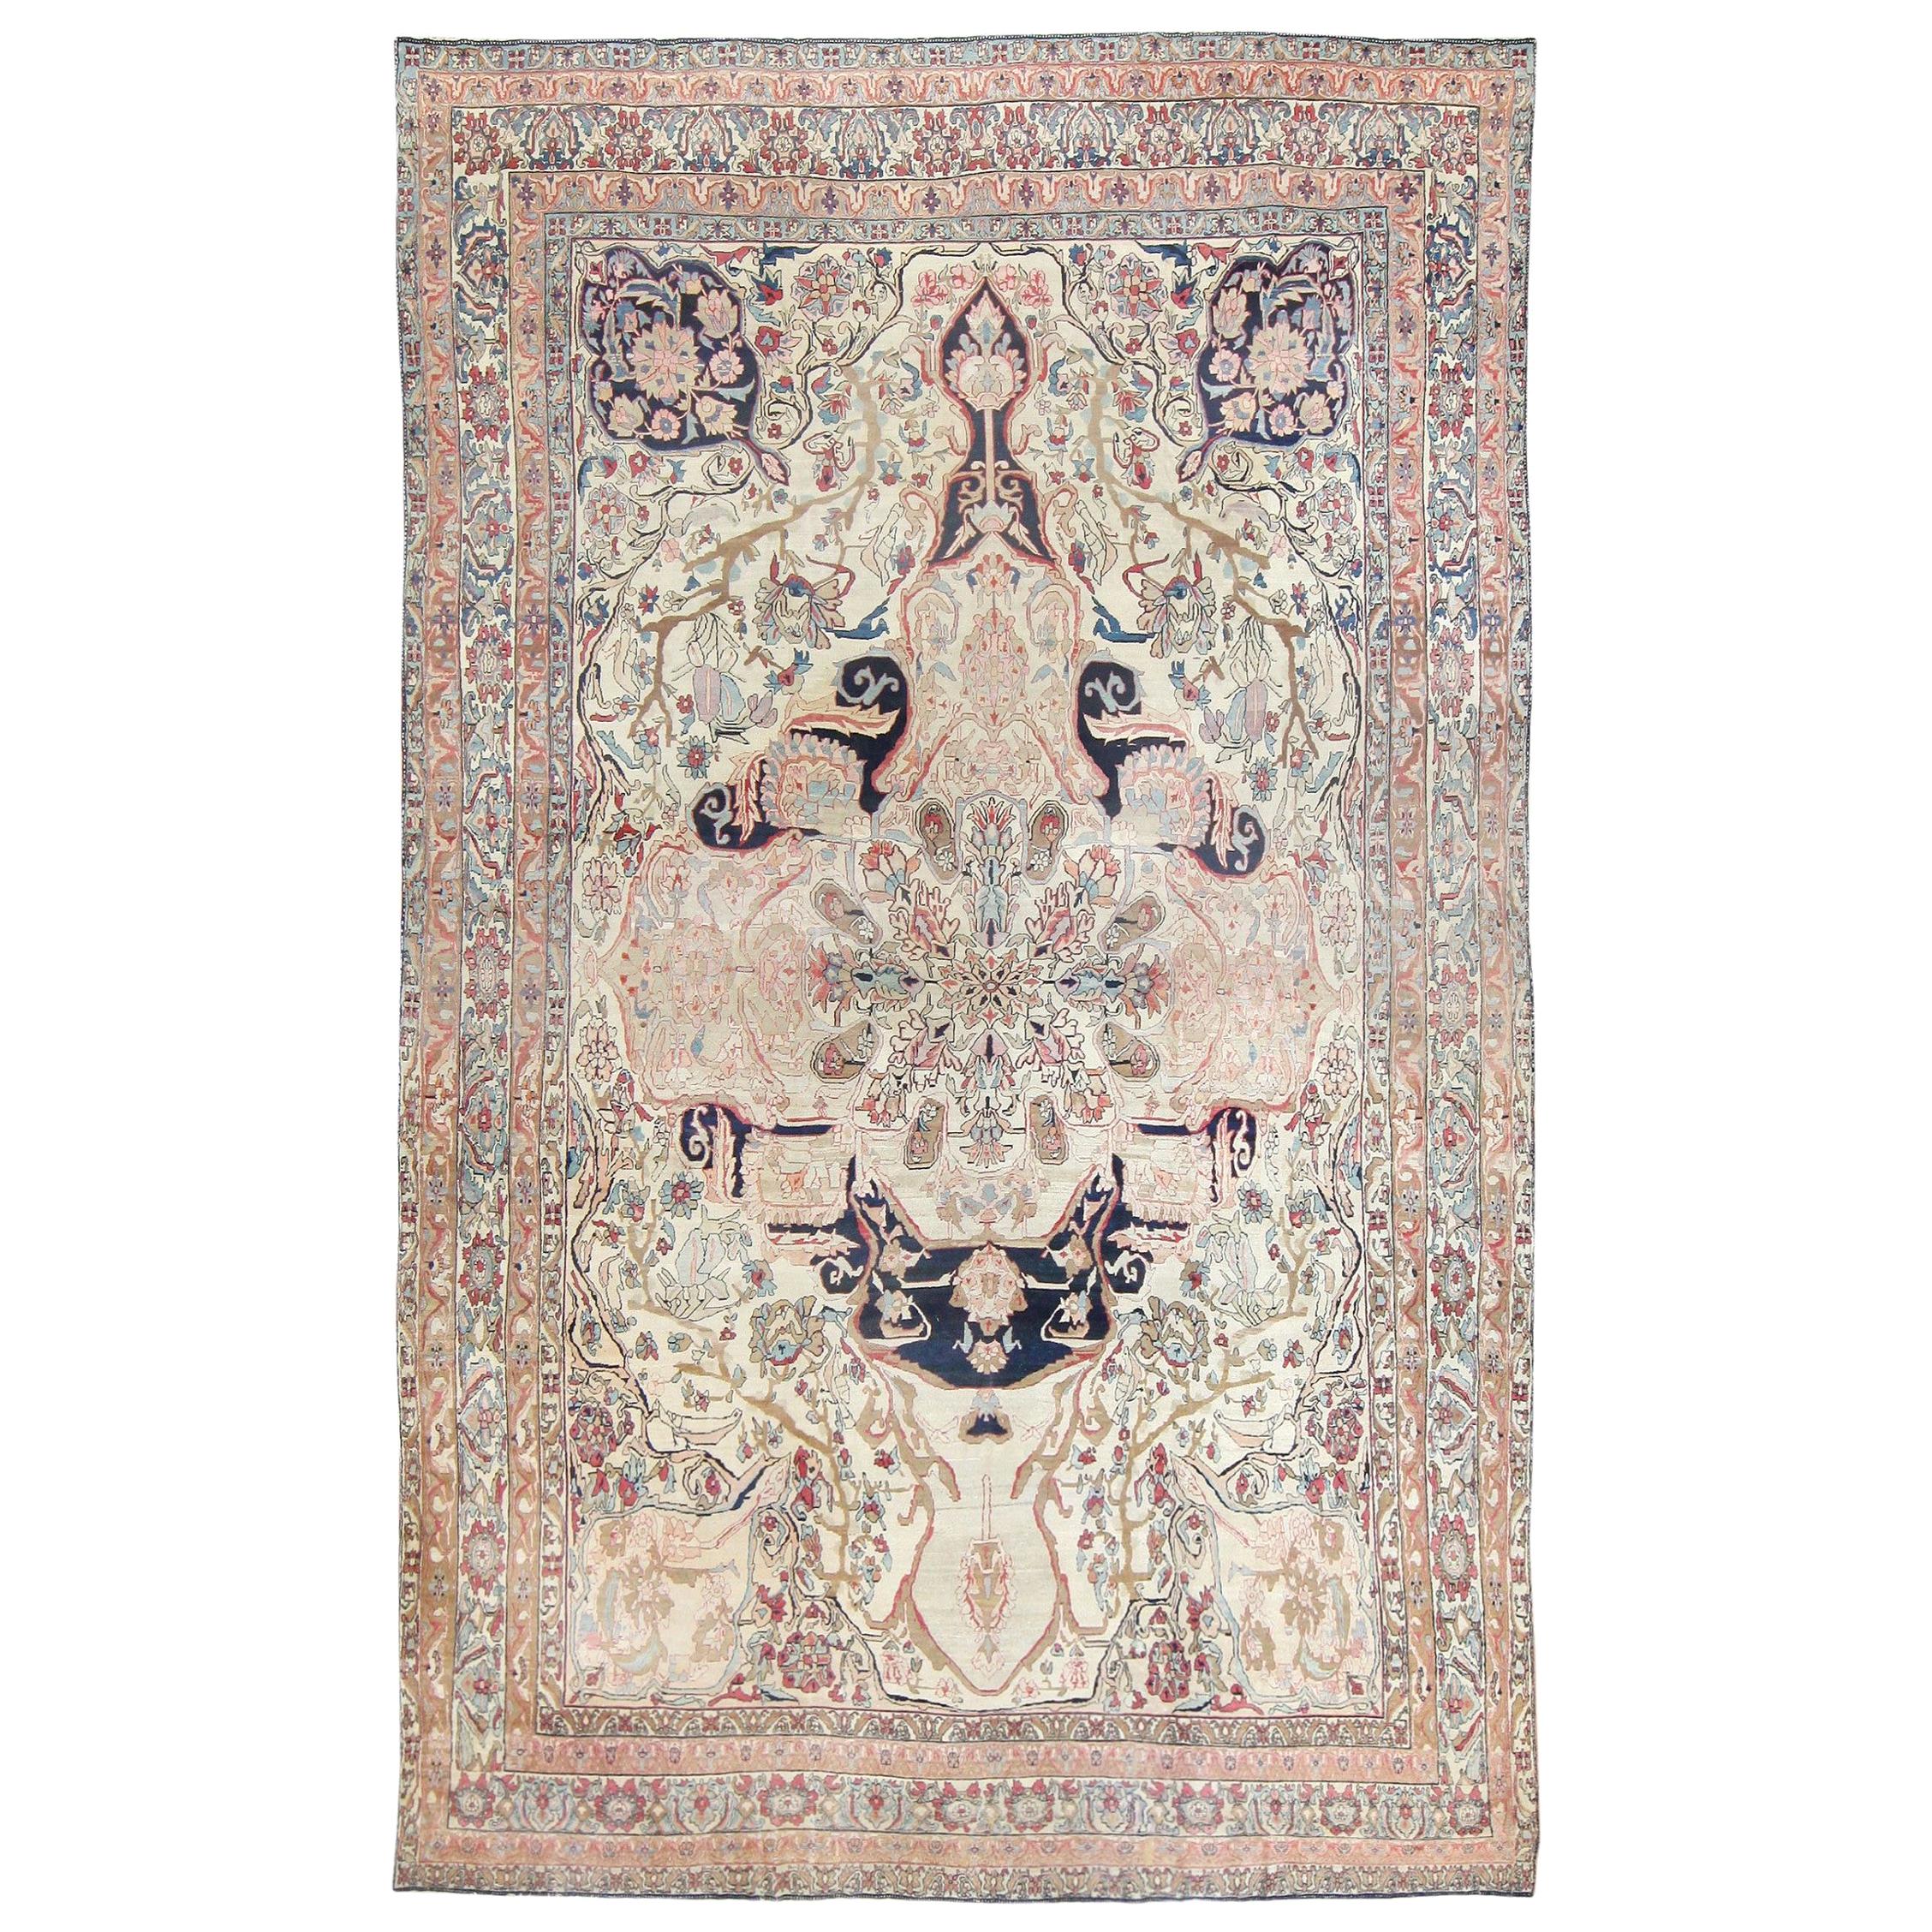 Antique Persian Kerman Rug. Size: 10 ft 9 in x 17 ft 6 in (3.28 m x 5.33 m)